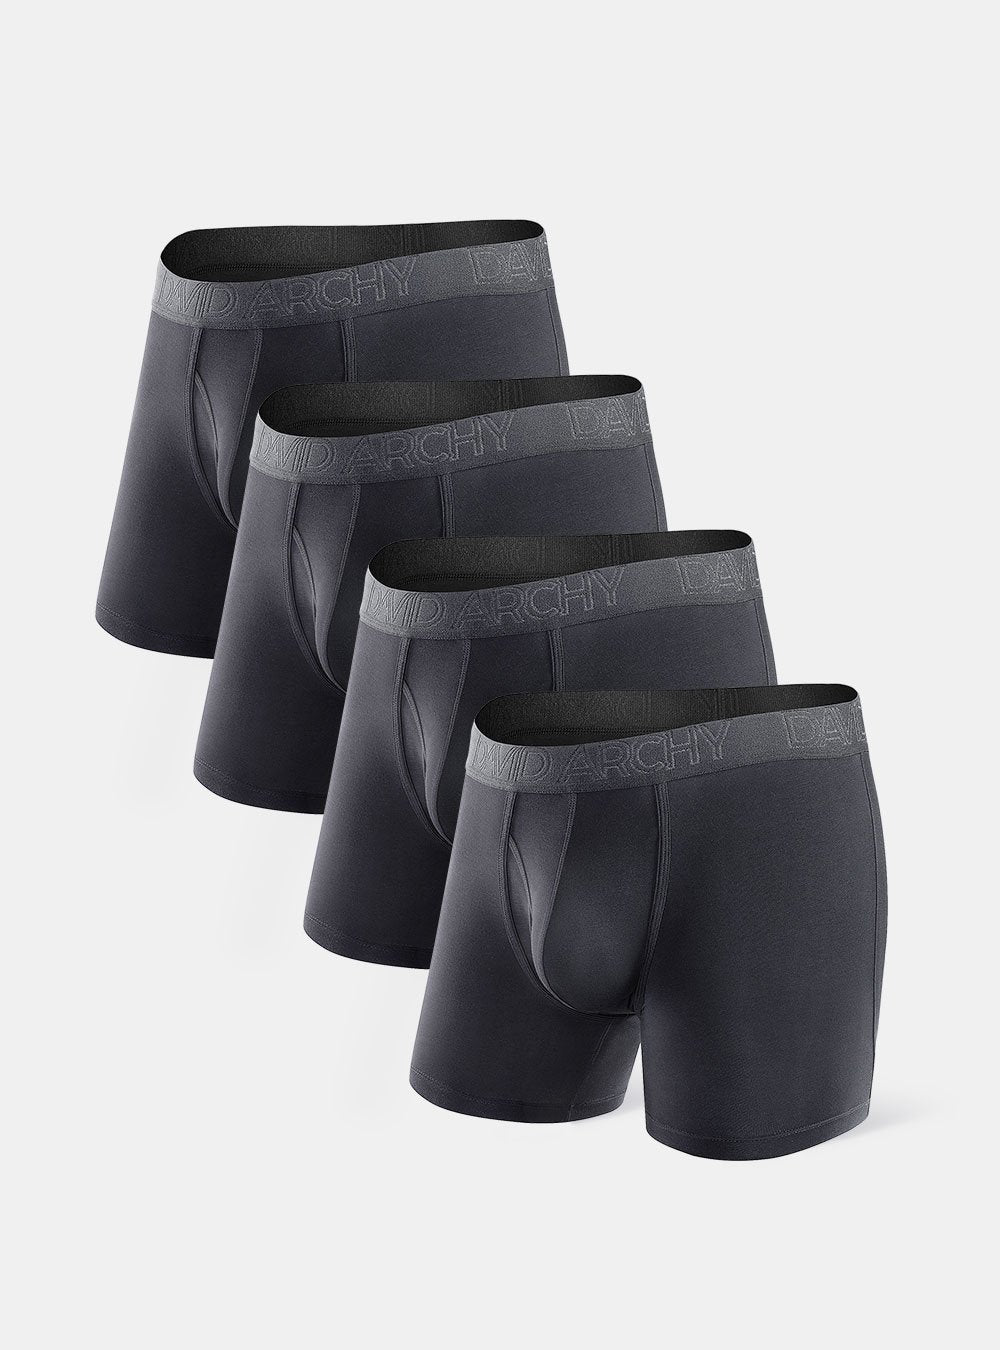 David Archy 7 Packs Bamboo Trunks With Dual Pouch Ultra Soft Smooth  Breathable Underwear – David Archy UK